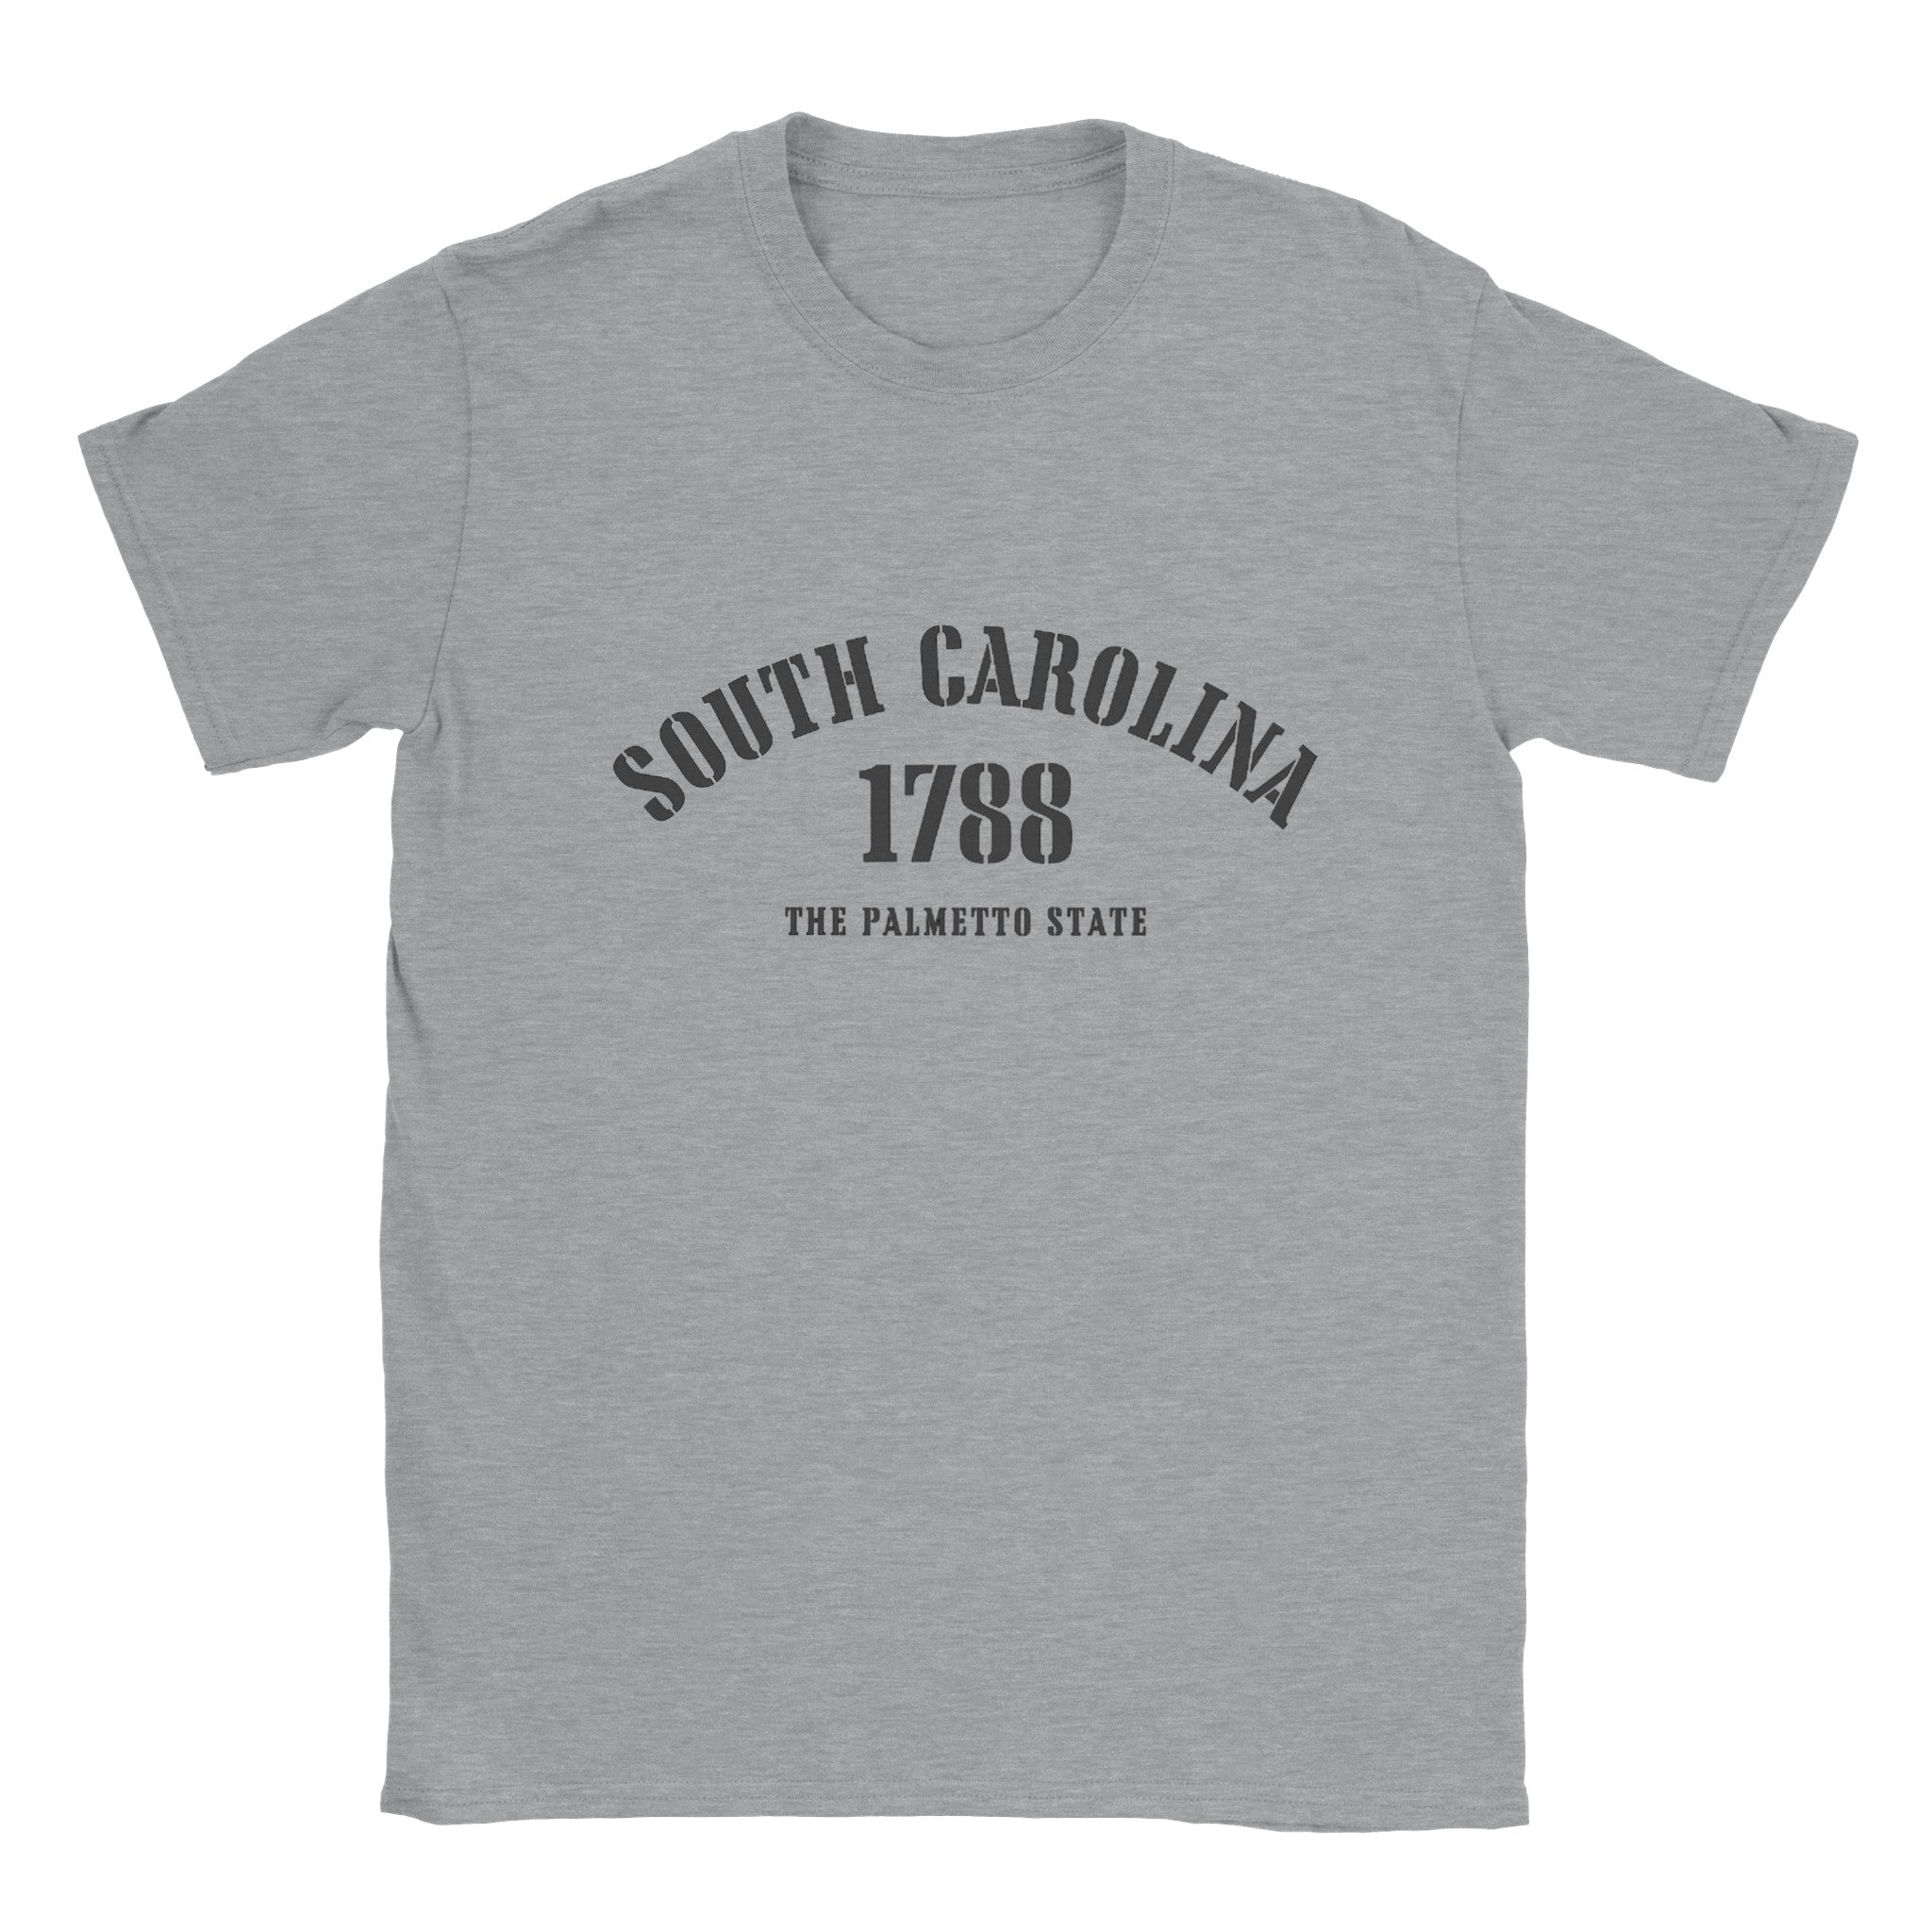 South Carolina- Classic Unisex Crewneck States T-shirt - Creations by Chris and Carlos